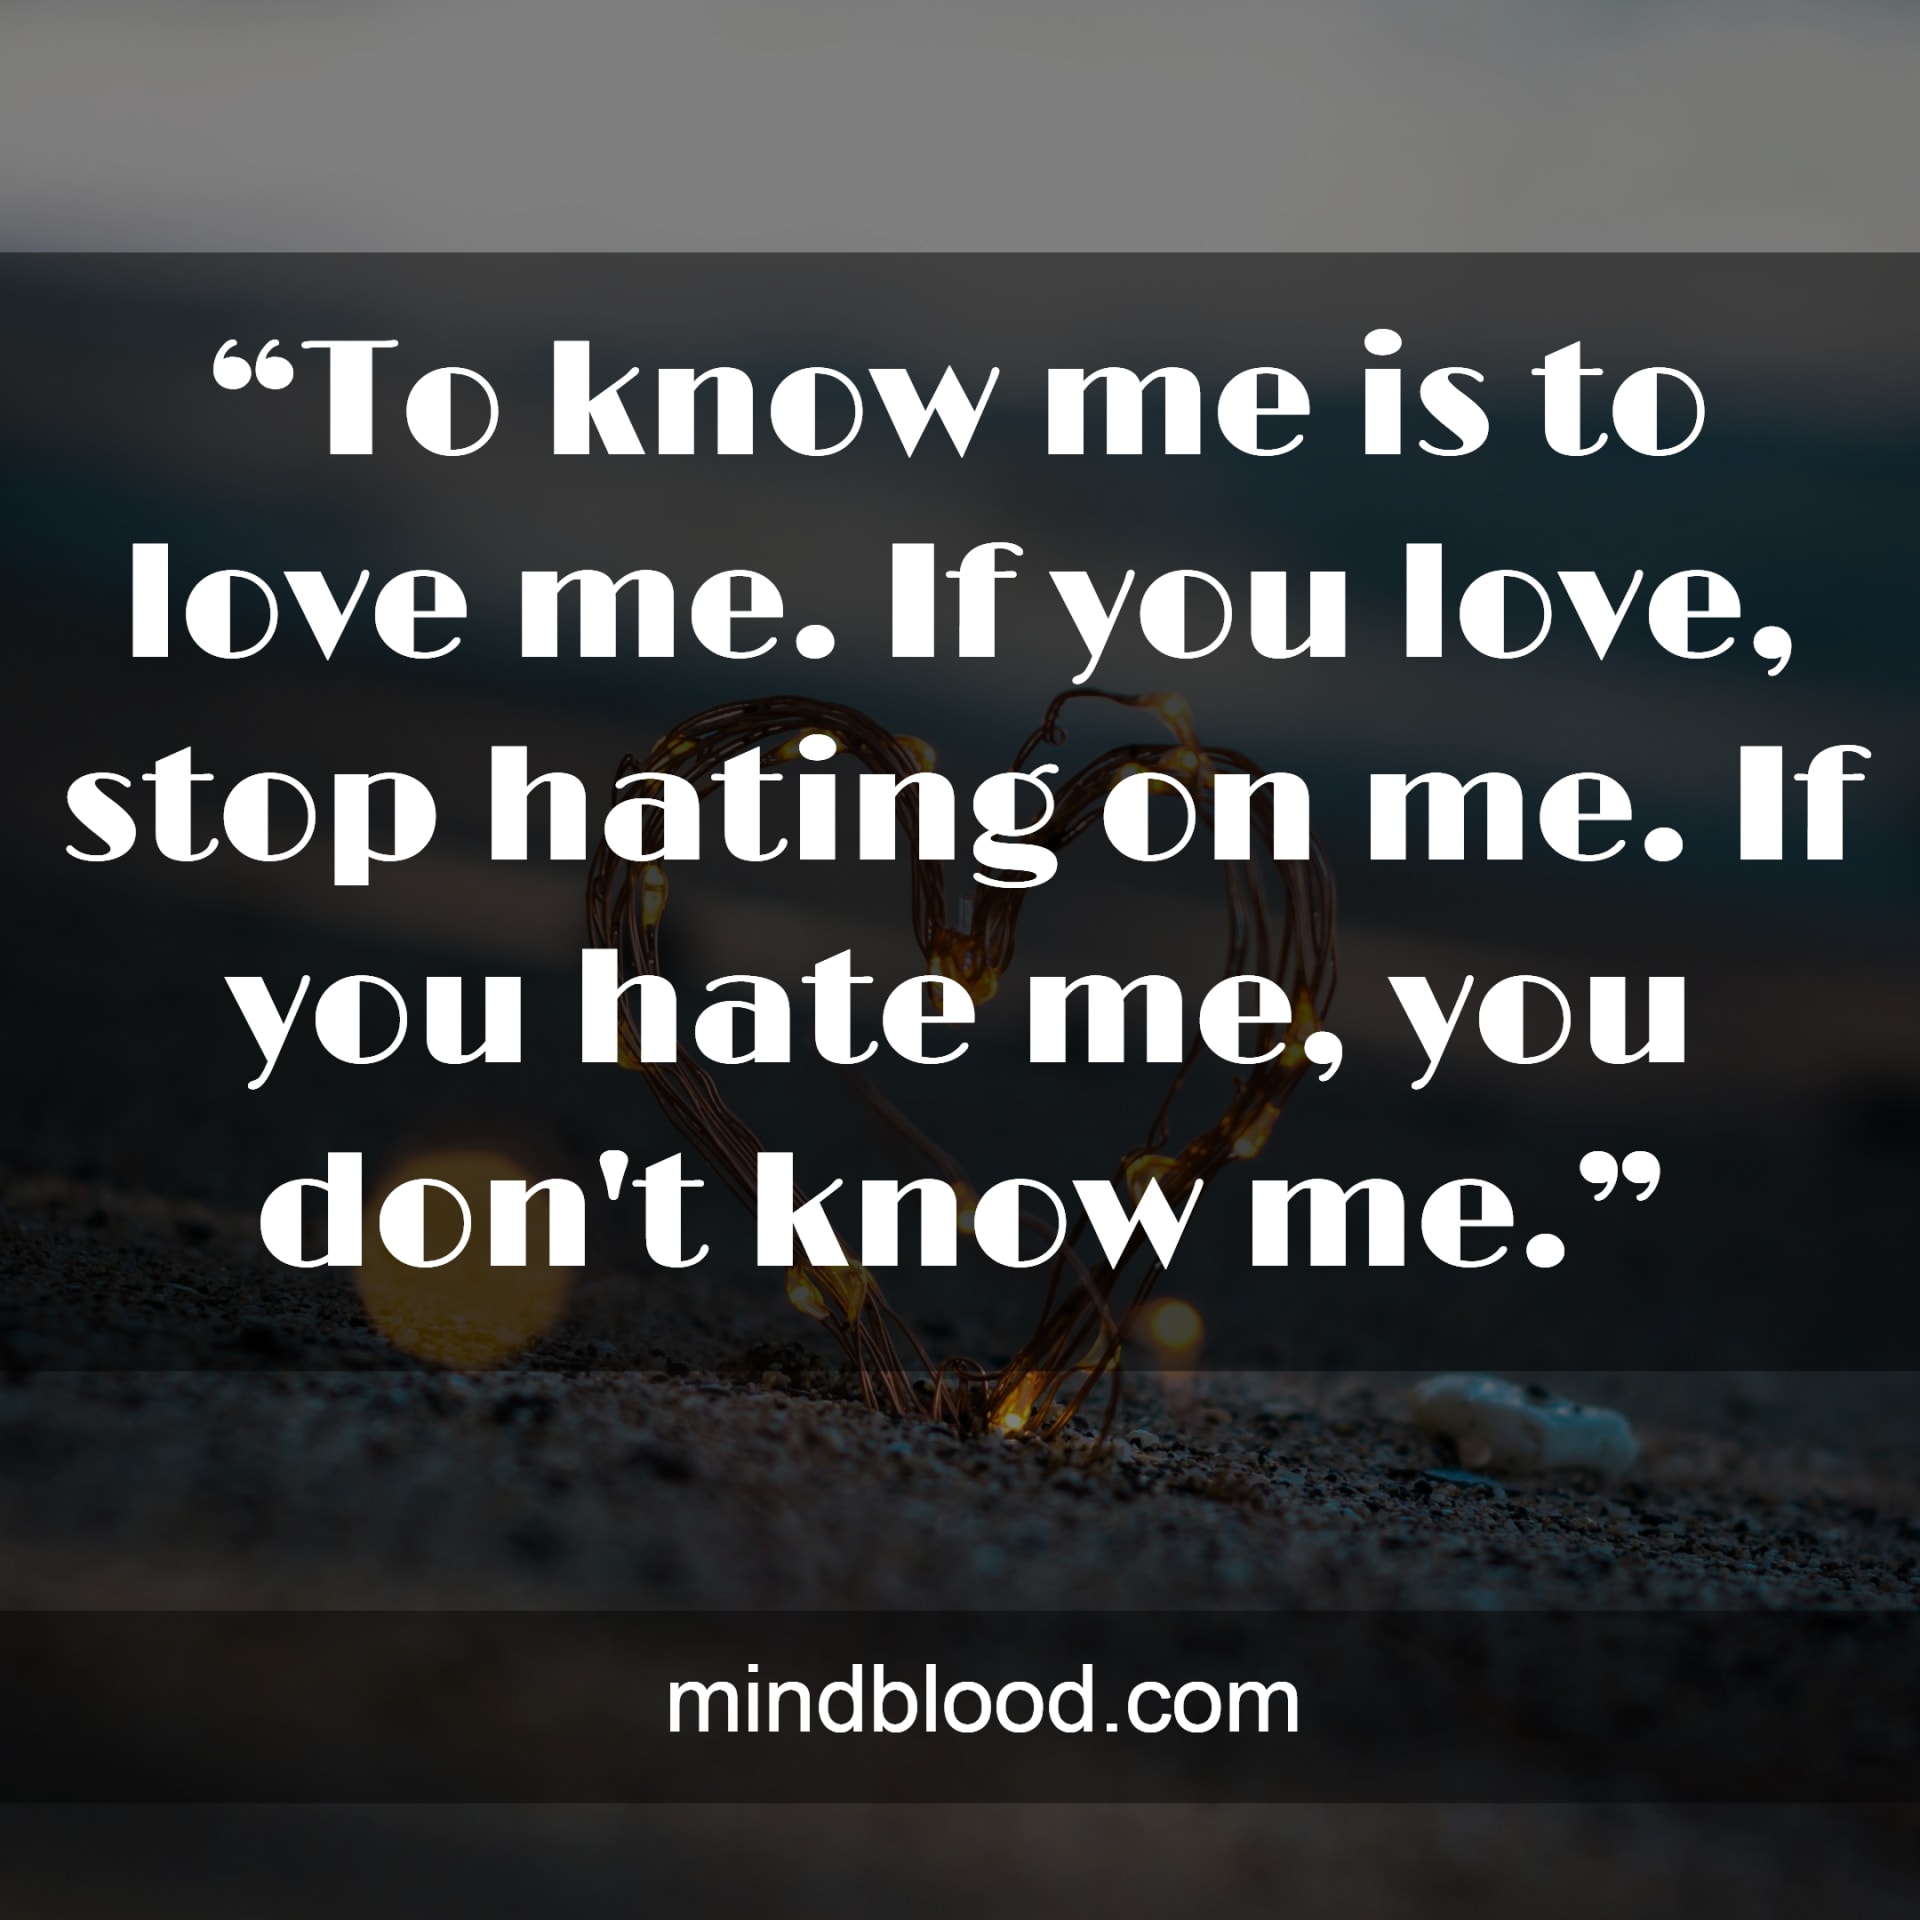 Quotes about hating someone you used to love(Top 28) - Mind Blood